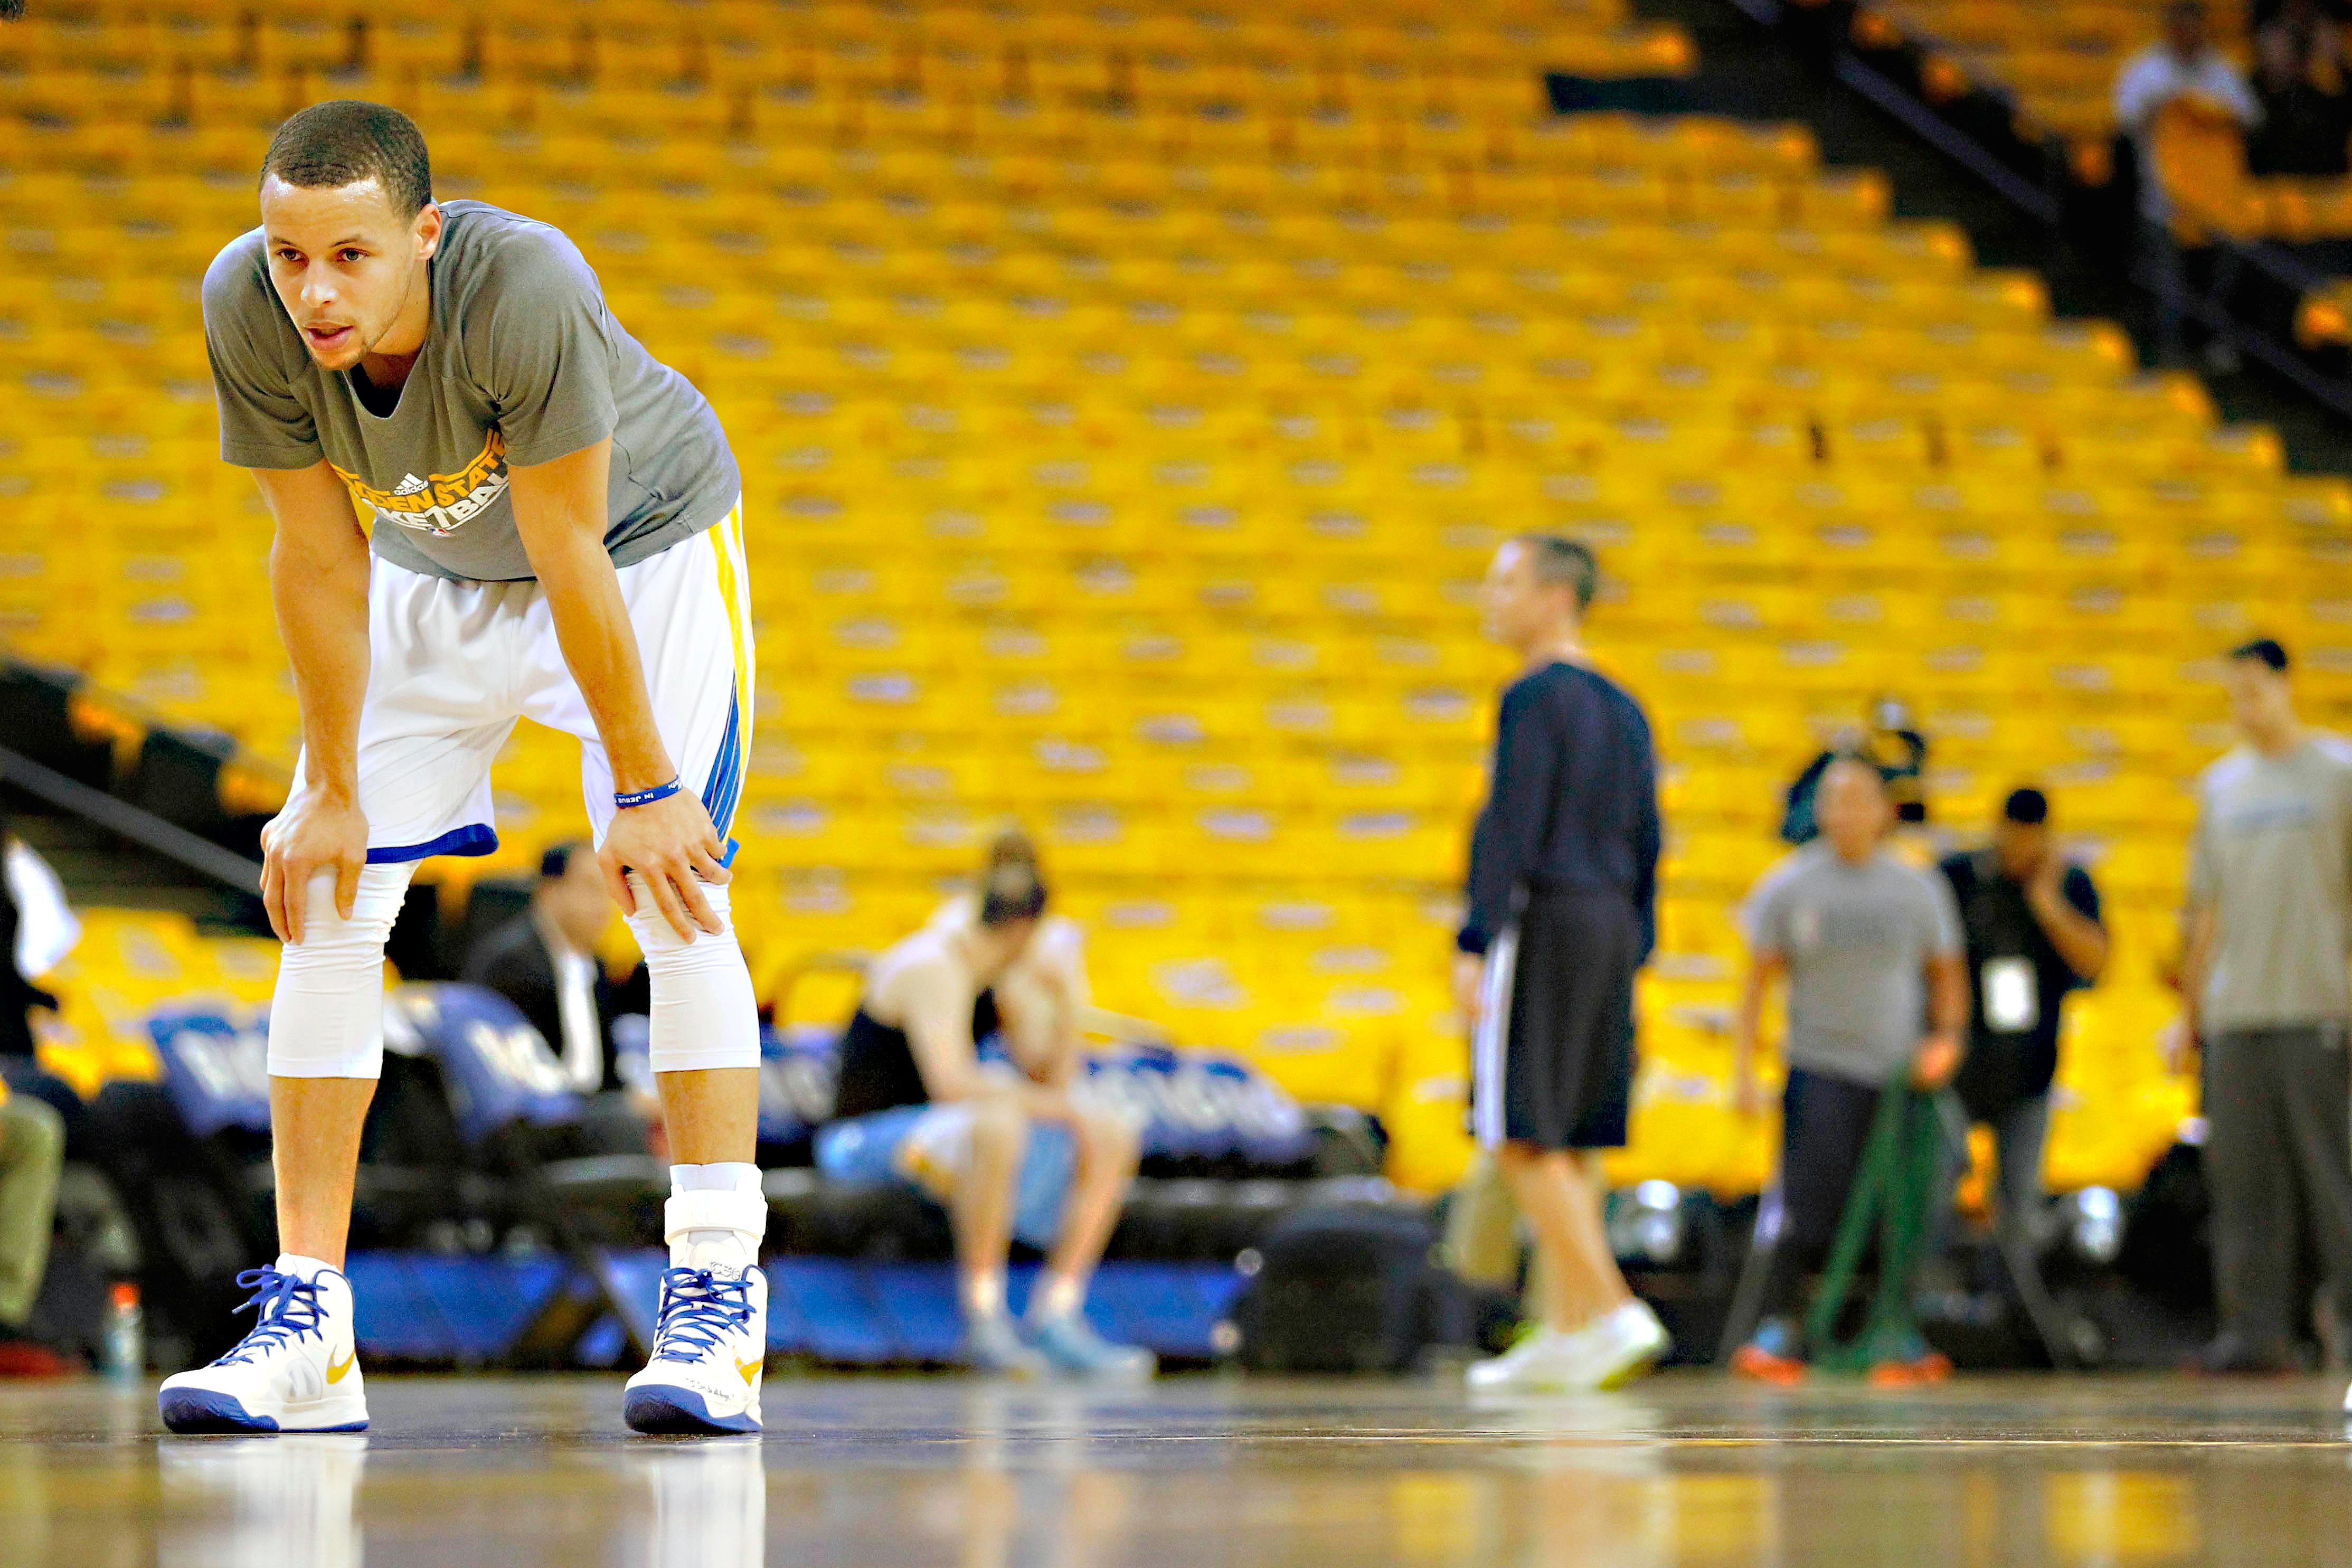 Curry Wallpaper HD. Curry wallpaper, Stephen curry, Stephen curry